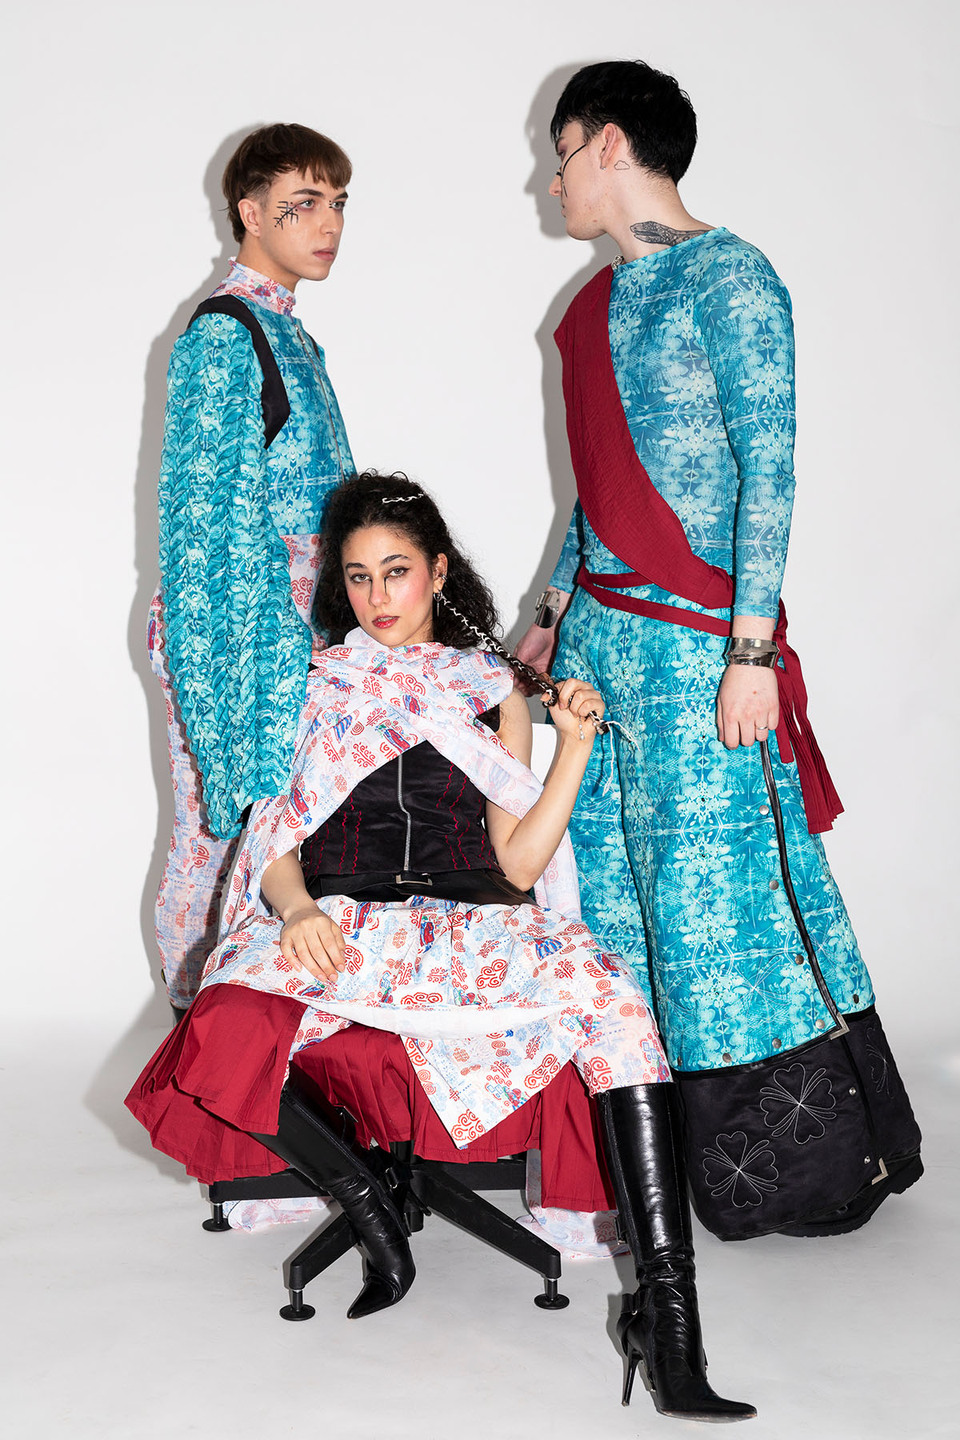 Woman seated wearing Slavic and Indian inspired skirt and scarves flanked by two young men in light blue tunic 